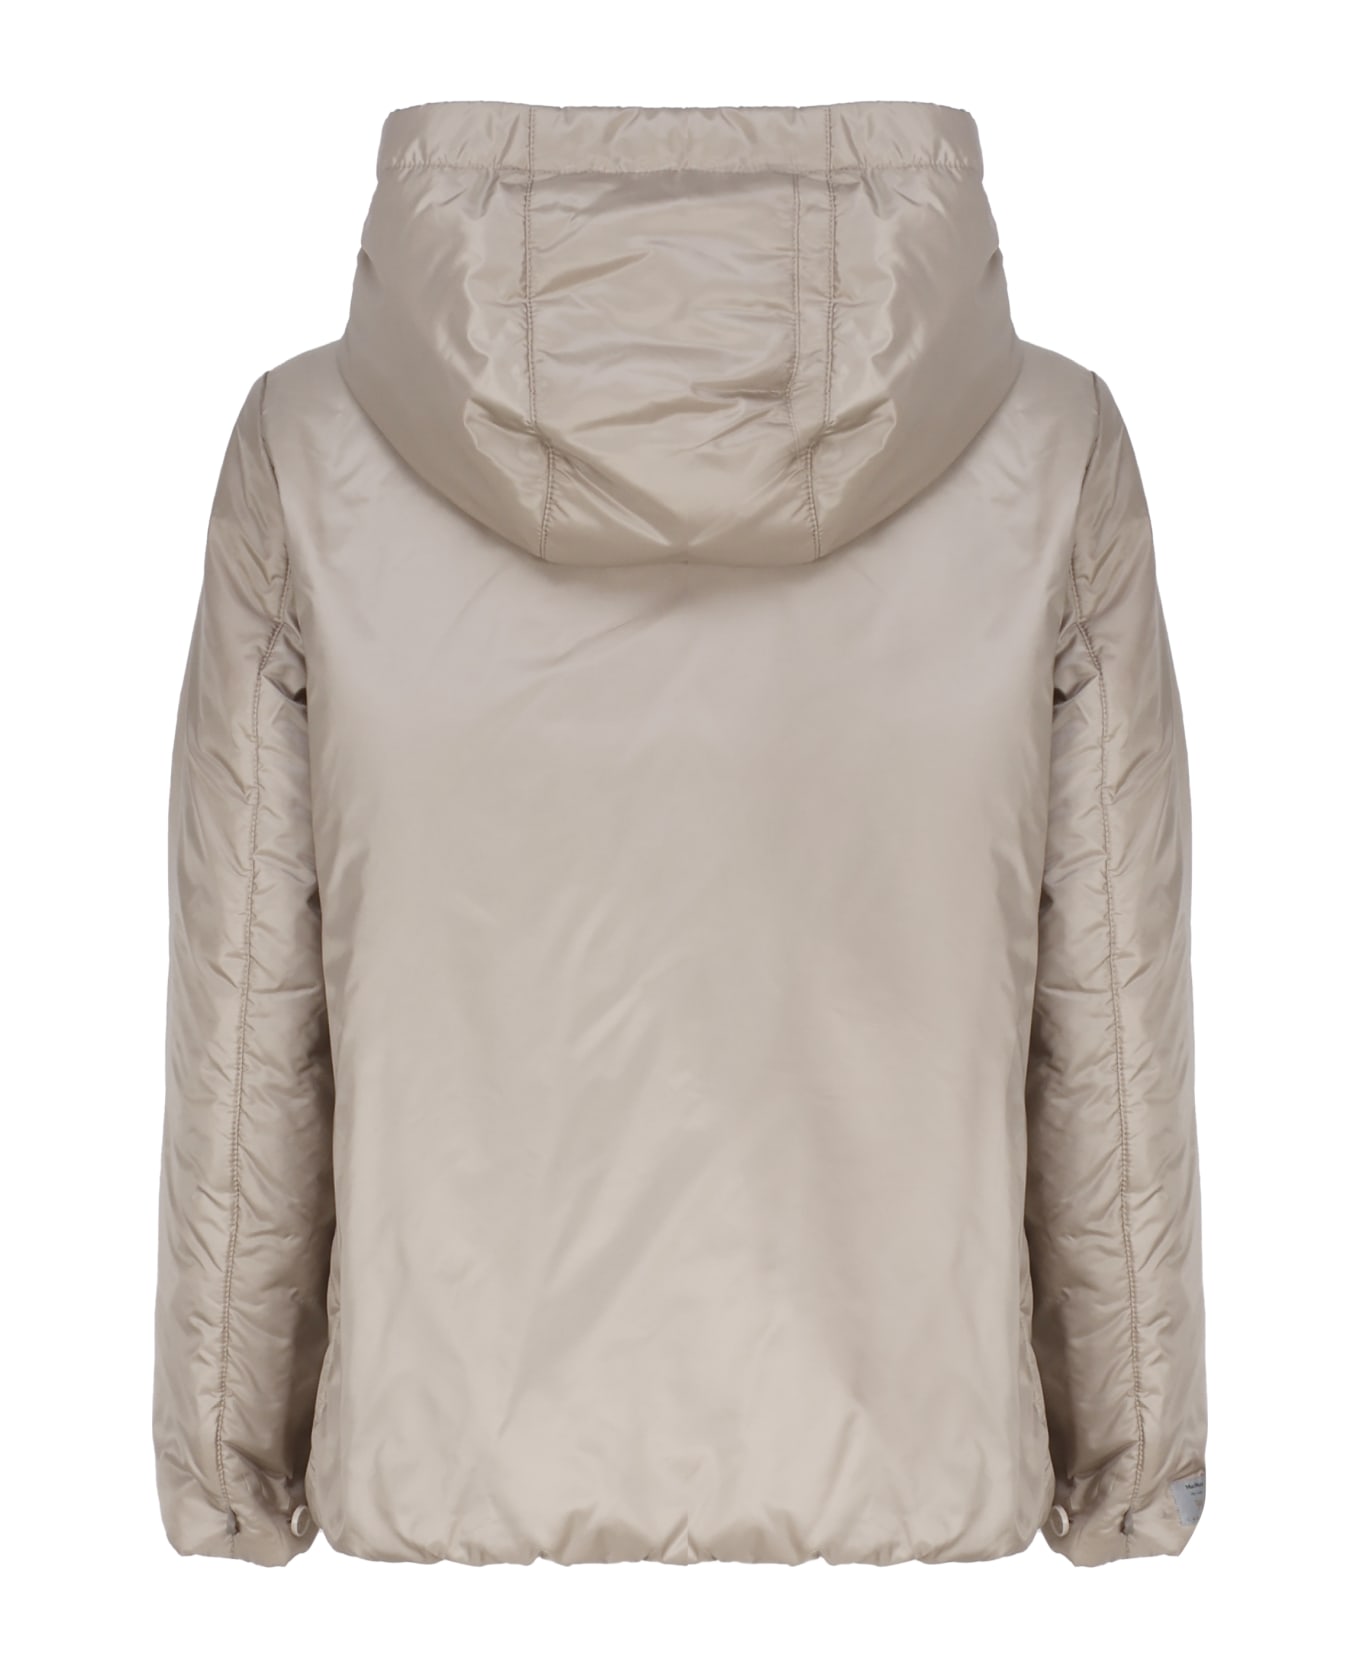 Max Mara The Cube Travel Jacket In Drip-proof Technical Canvas - Dirty ice